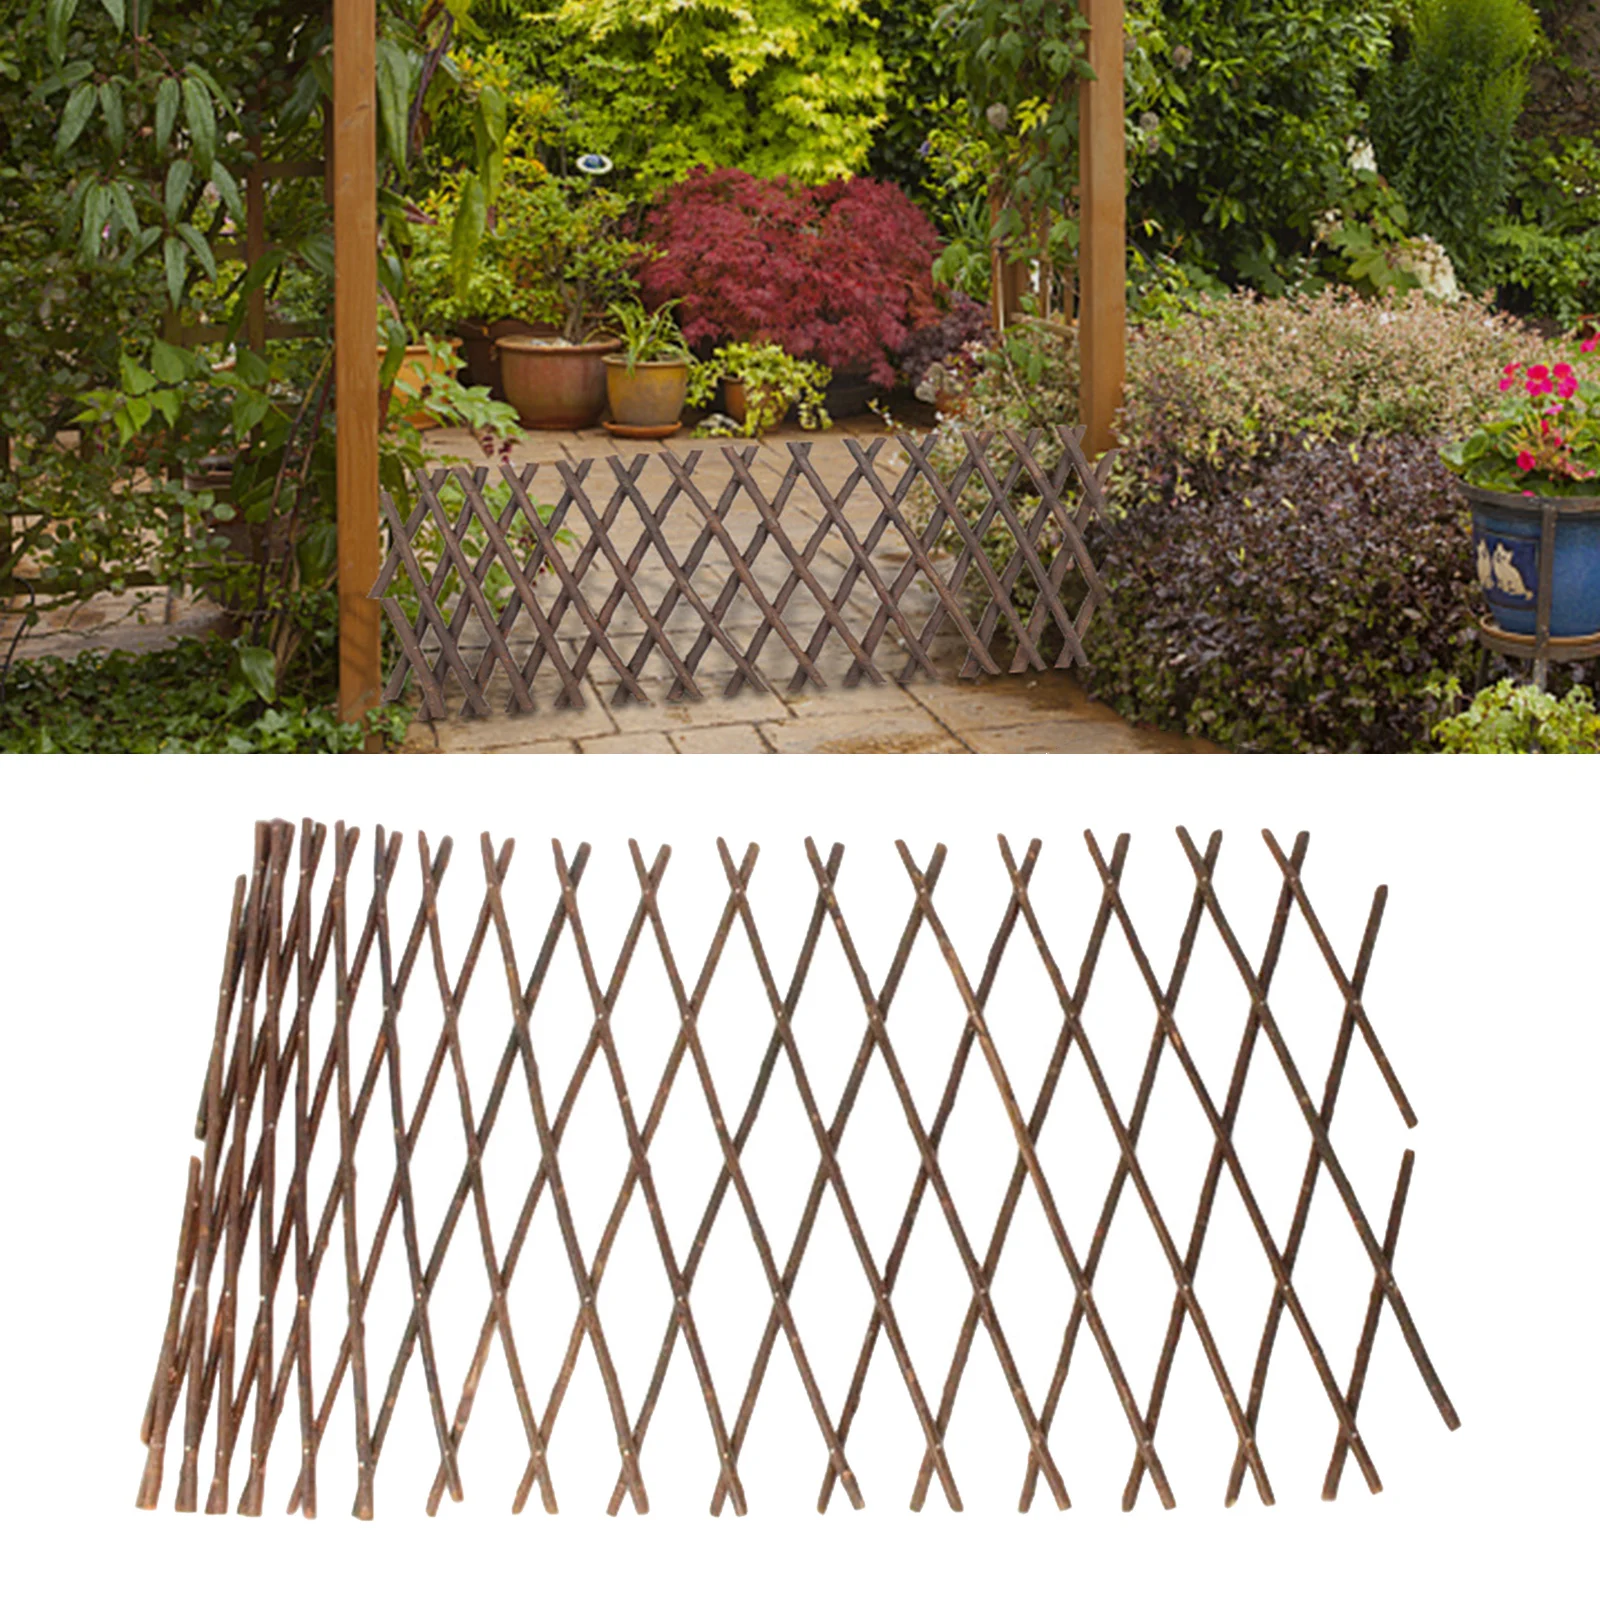 Expandable Garden Fence Wood Vines Ivy Climbing Frame Support Lattice Panel